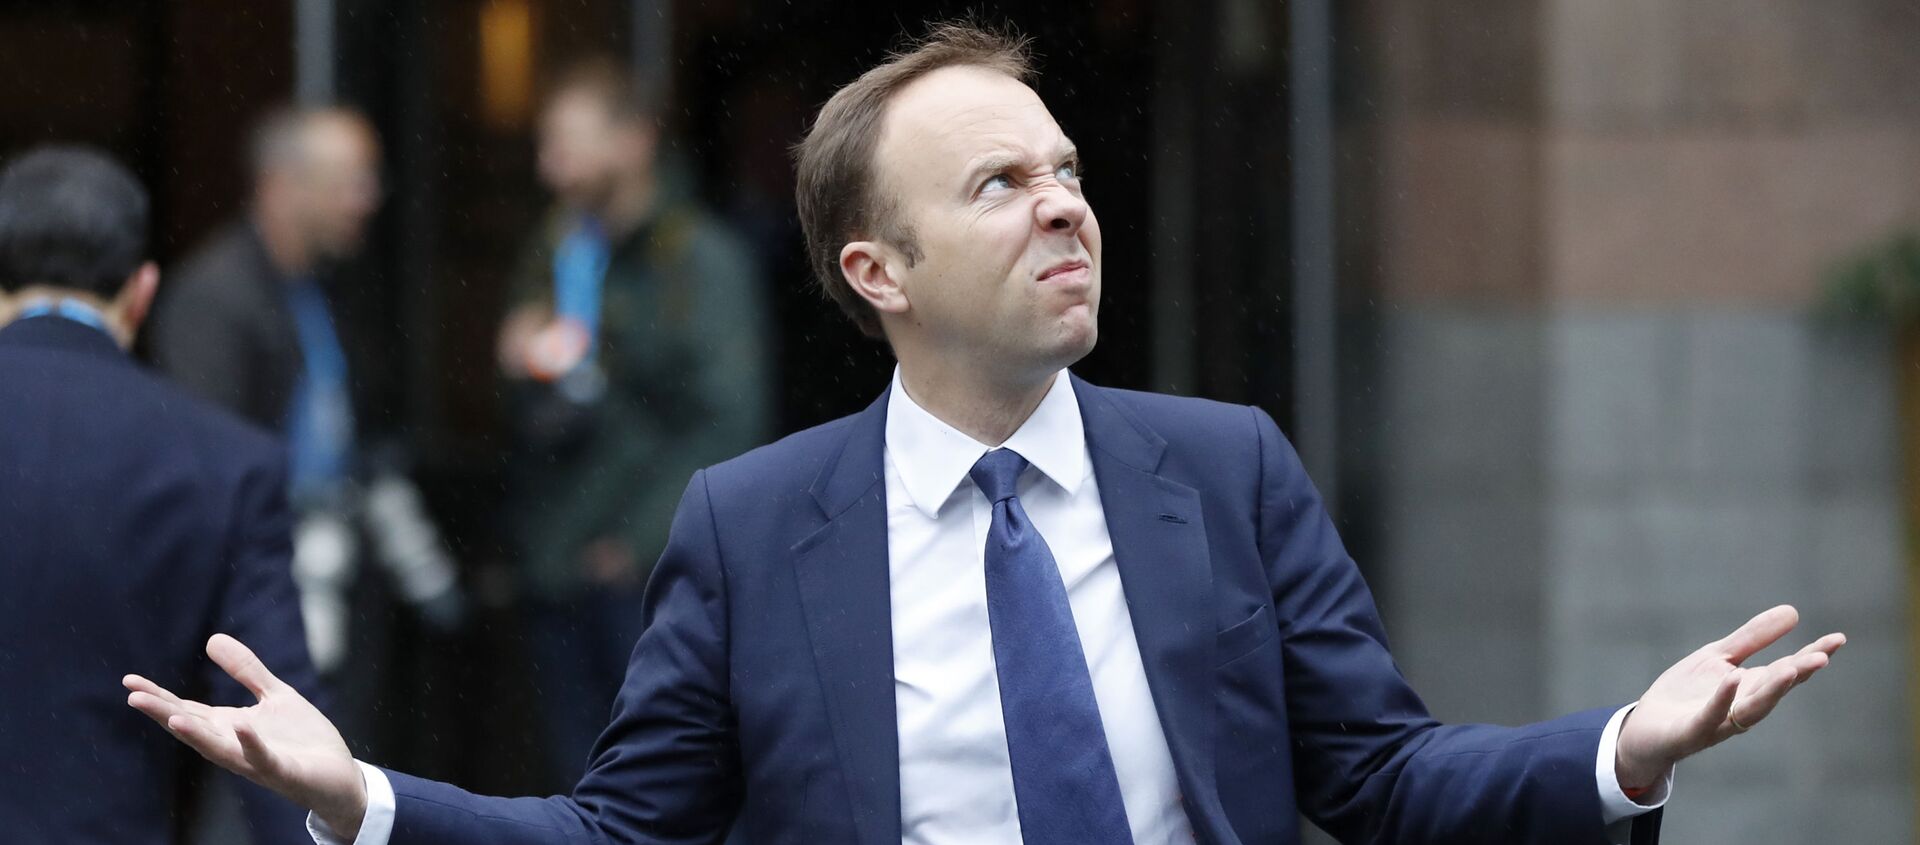 Matt Hancock, Secretary of State for Health and Social Care, walks through the rain to the Conservative Party Conference in Manchester, England, Tuesday, Oct. 1, 2019.  - Sputnik International, 1920, 25.06.2021